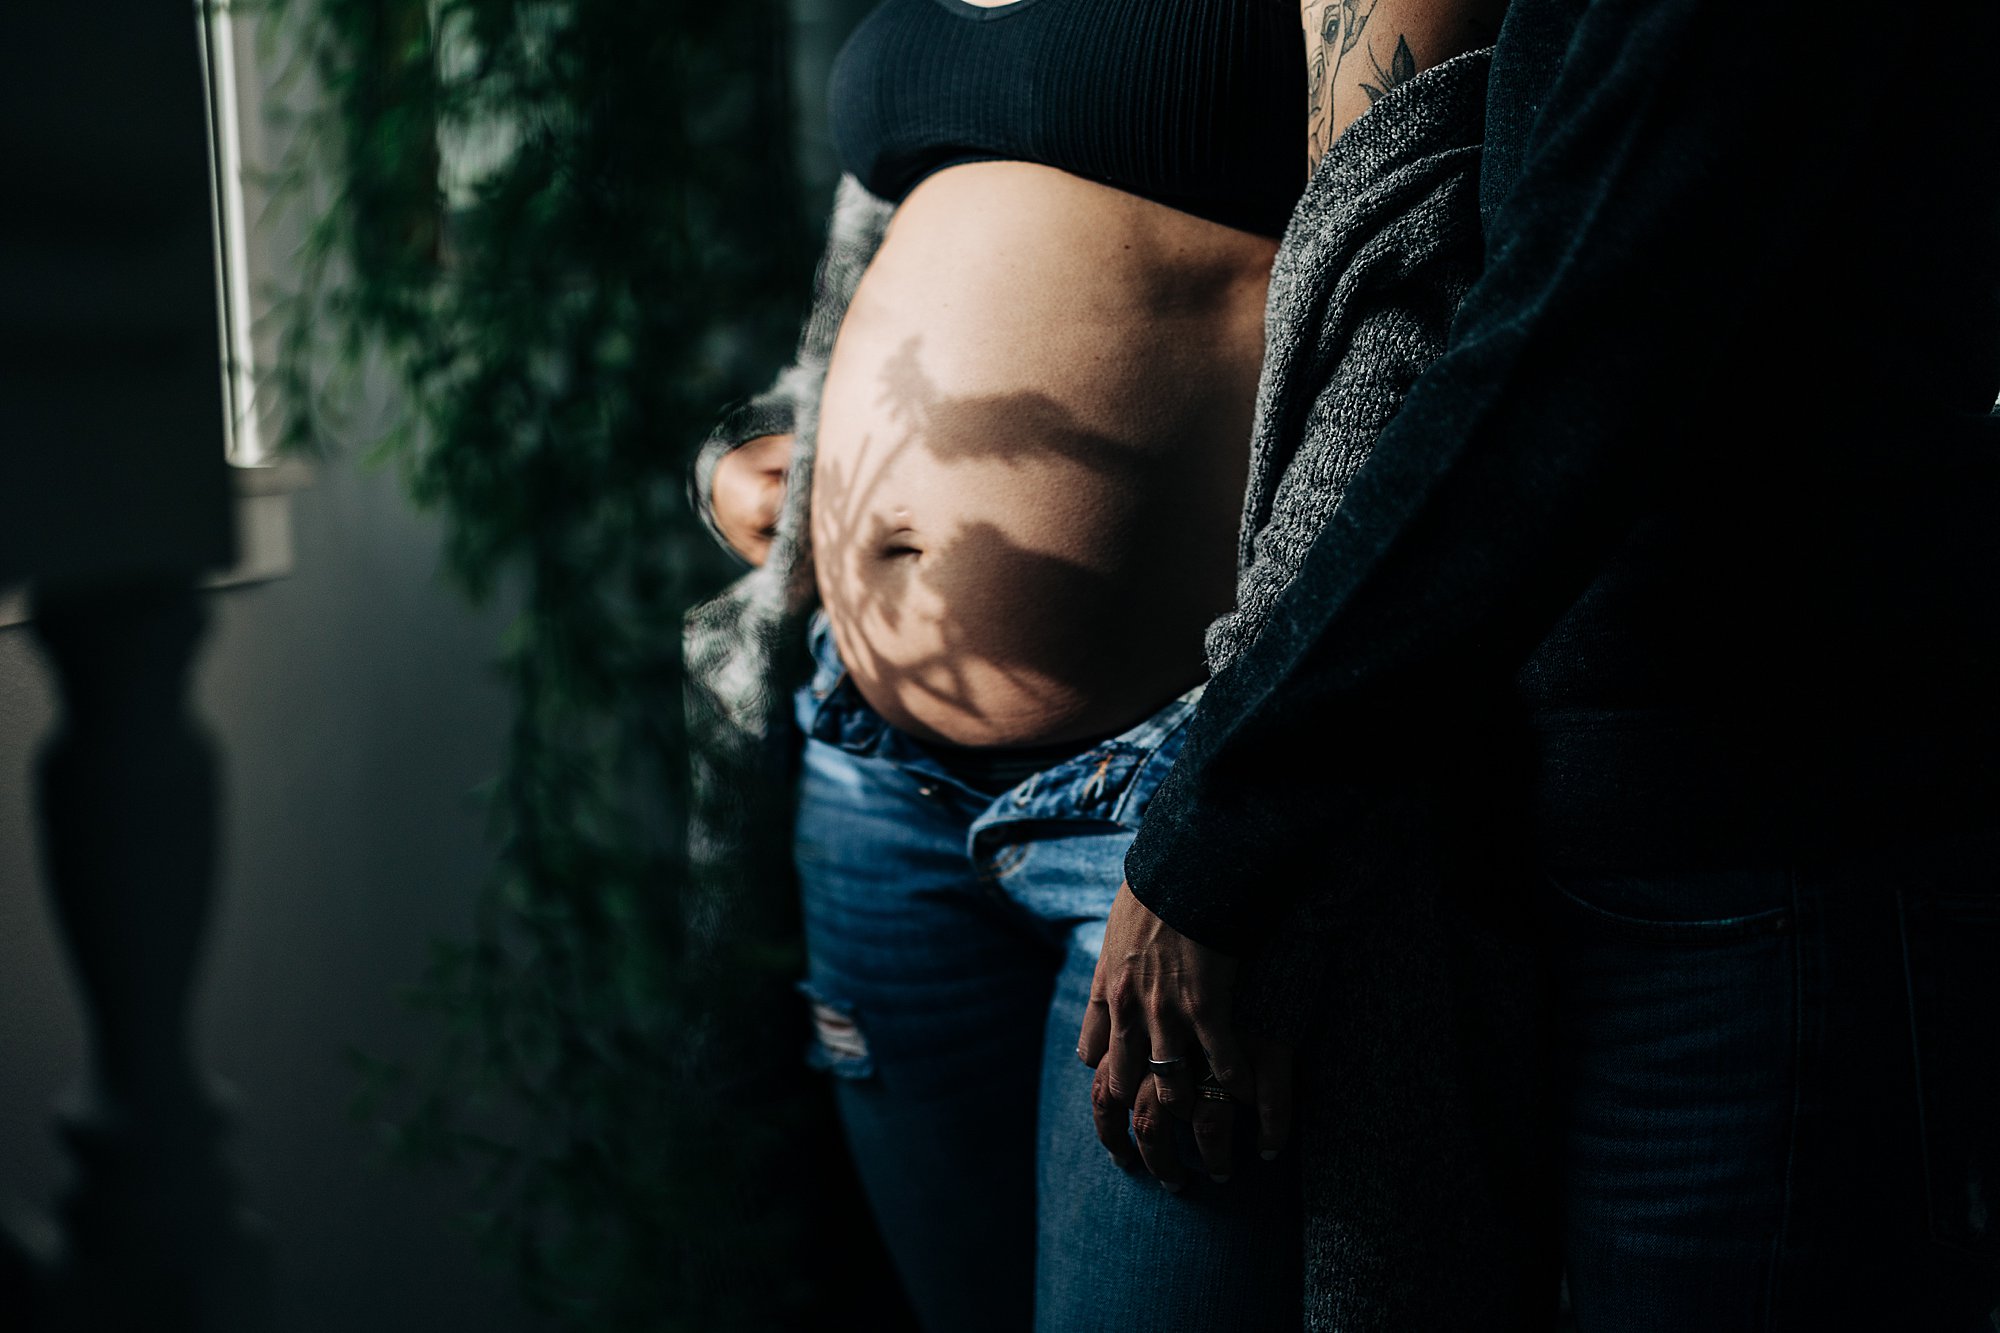 in-home, same-sex maternity photos in Cheyenne, Wyoming